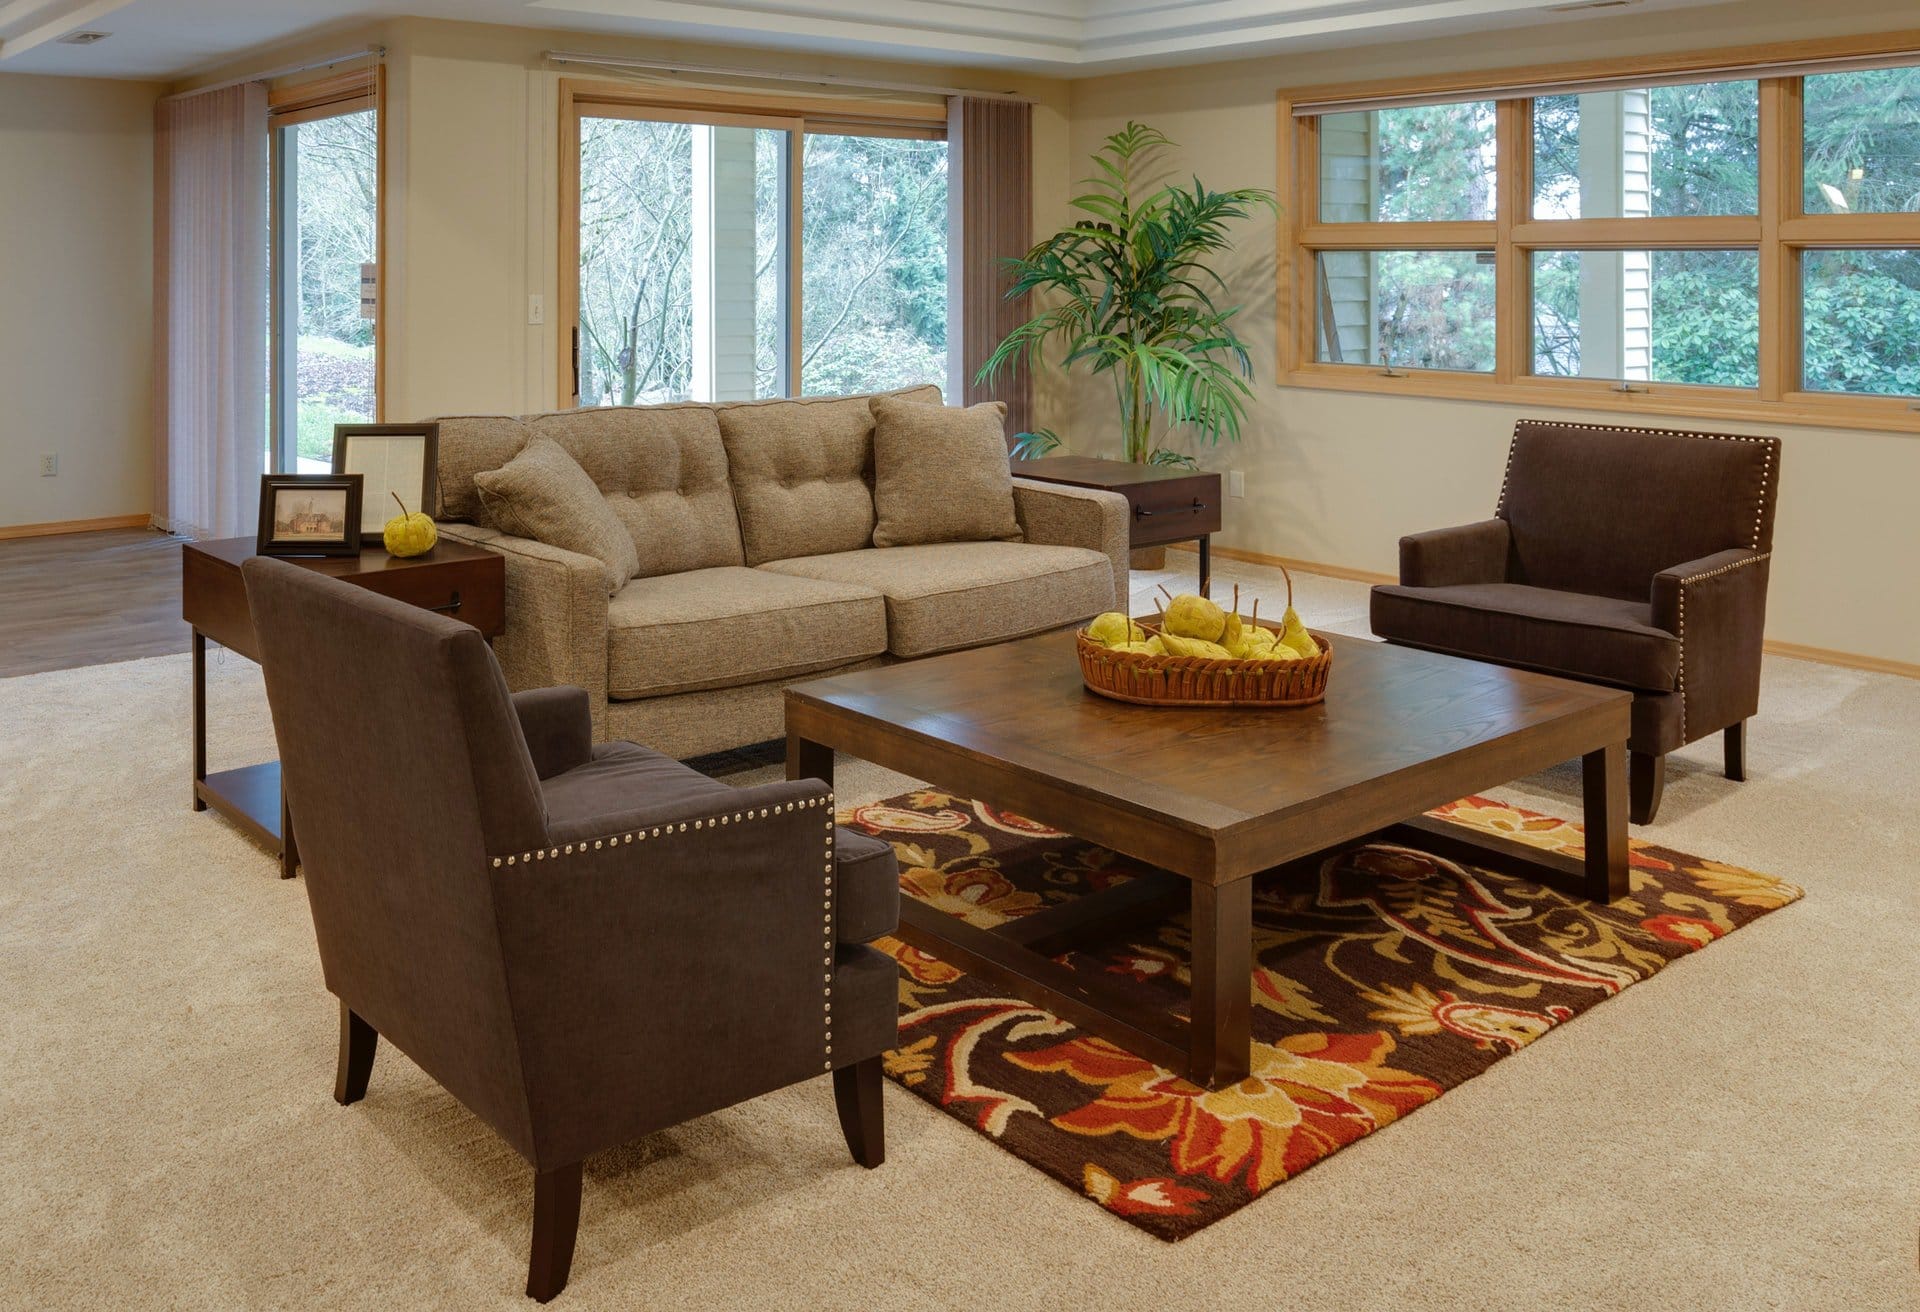  Get a Traditional Look with a Brown Sofa and Cream Carpet